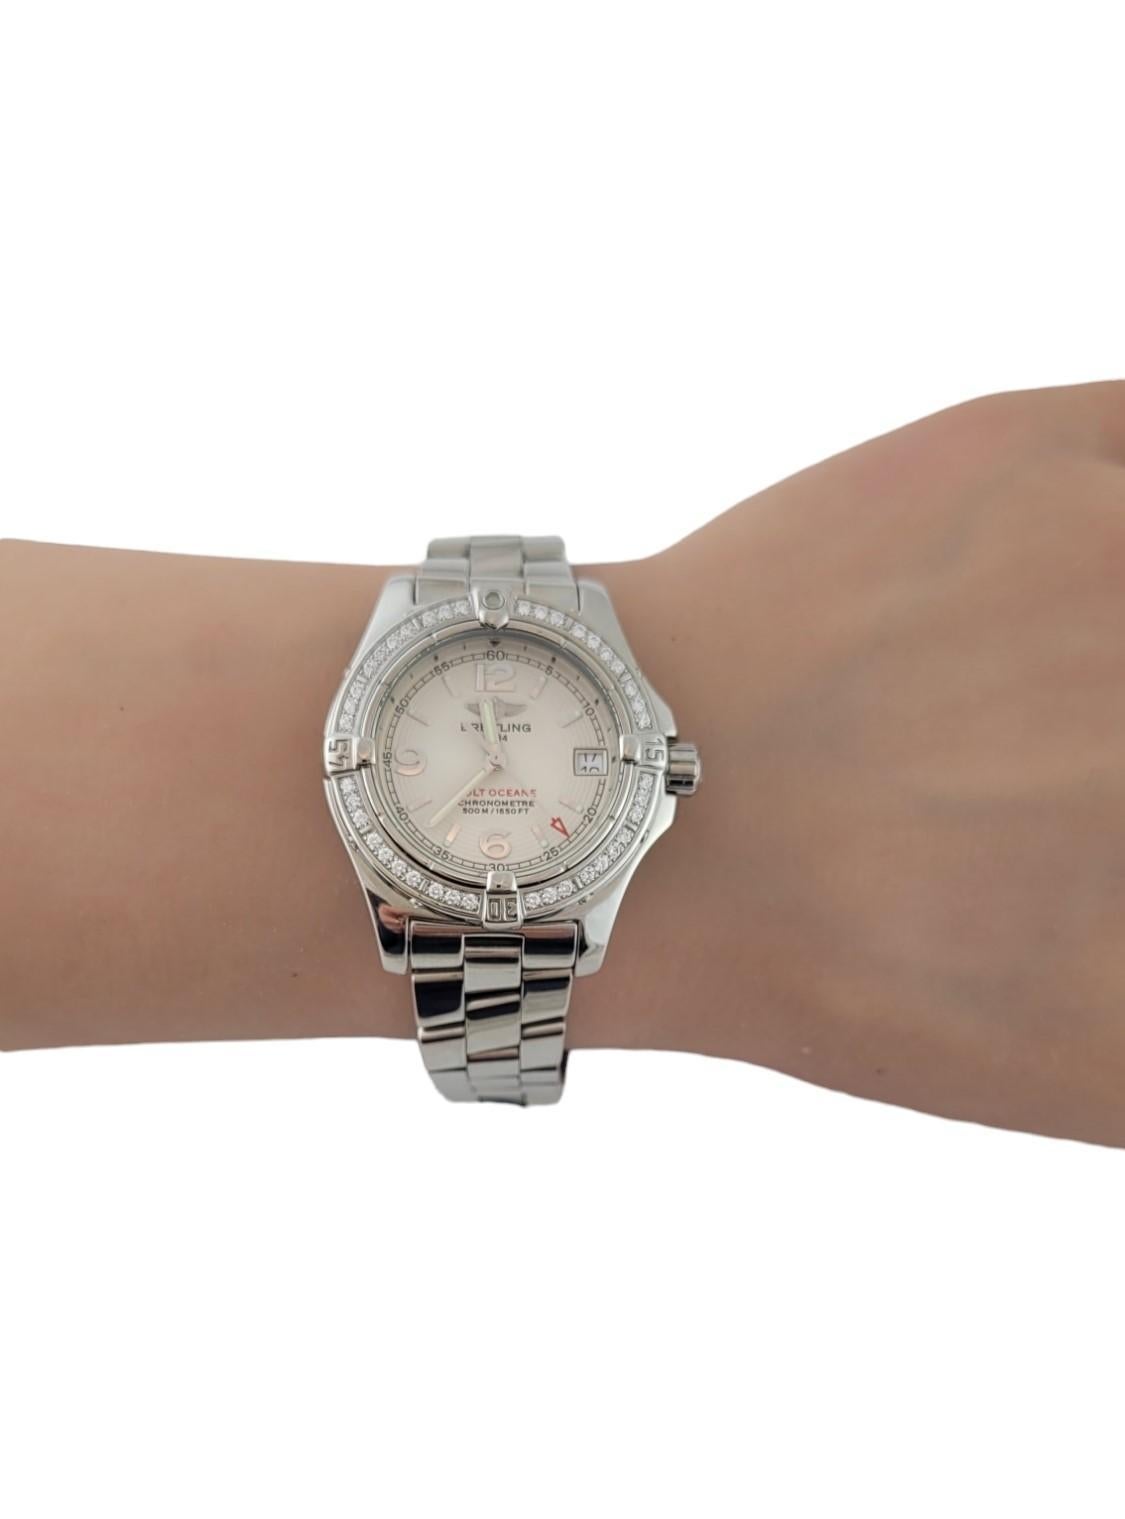 2007 Breitling Ladies Colt Oceane Diamond Watch A77380 Box/Papers # 17227 For Sale 3